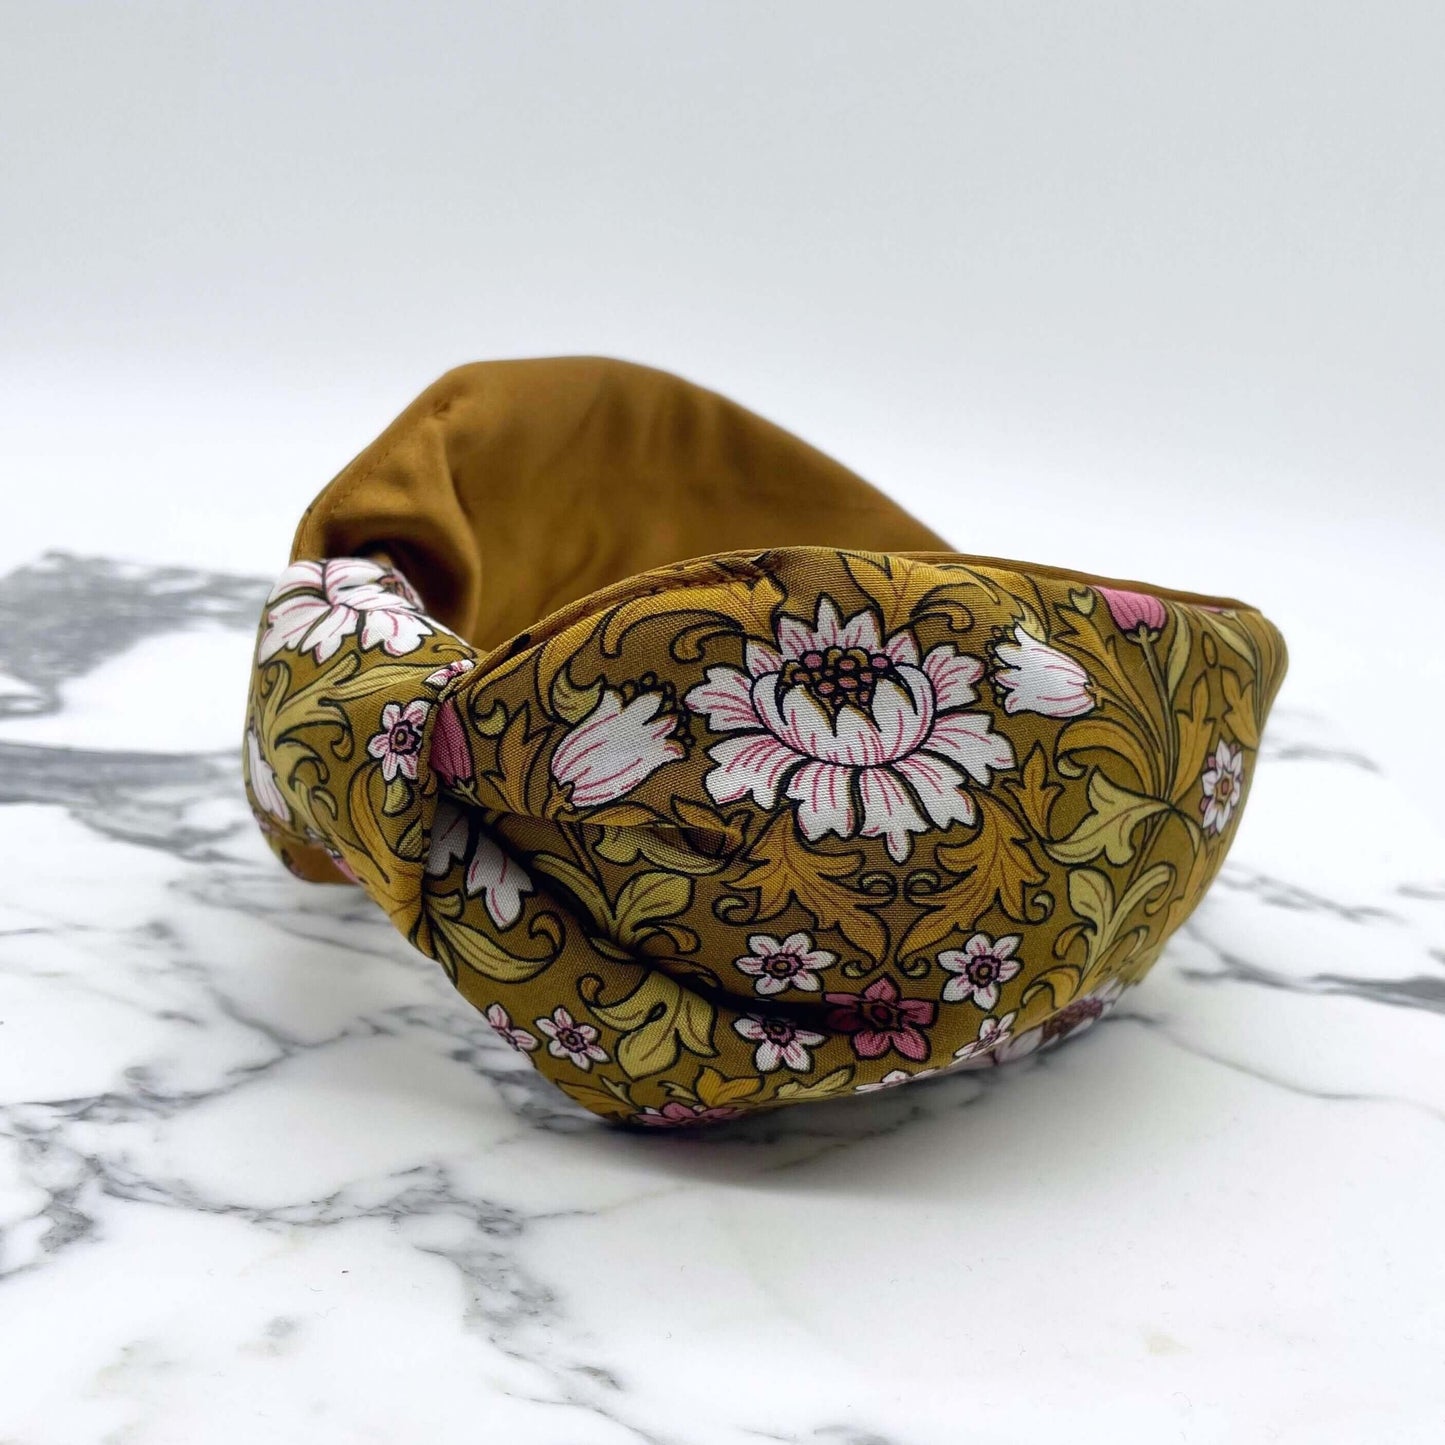 William Morris- Inspired Knot Headband with satin lining in mustard. Flowers and leaves print